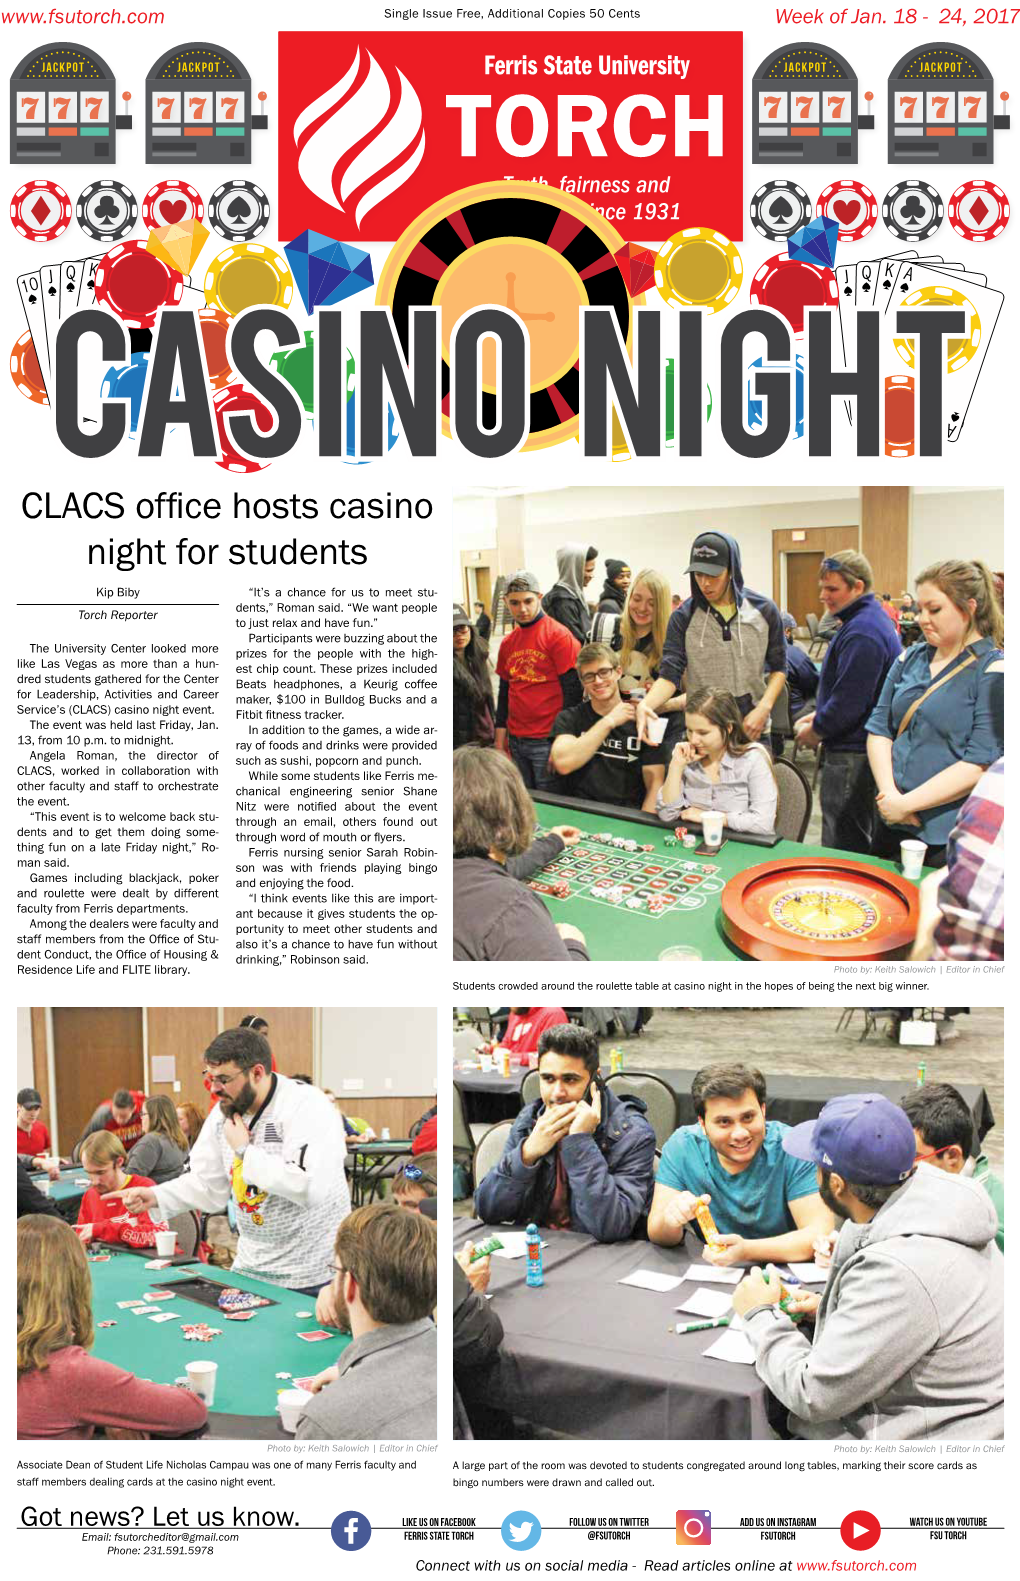 CLACS Office Hosts Casino Night for Students